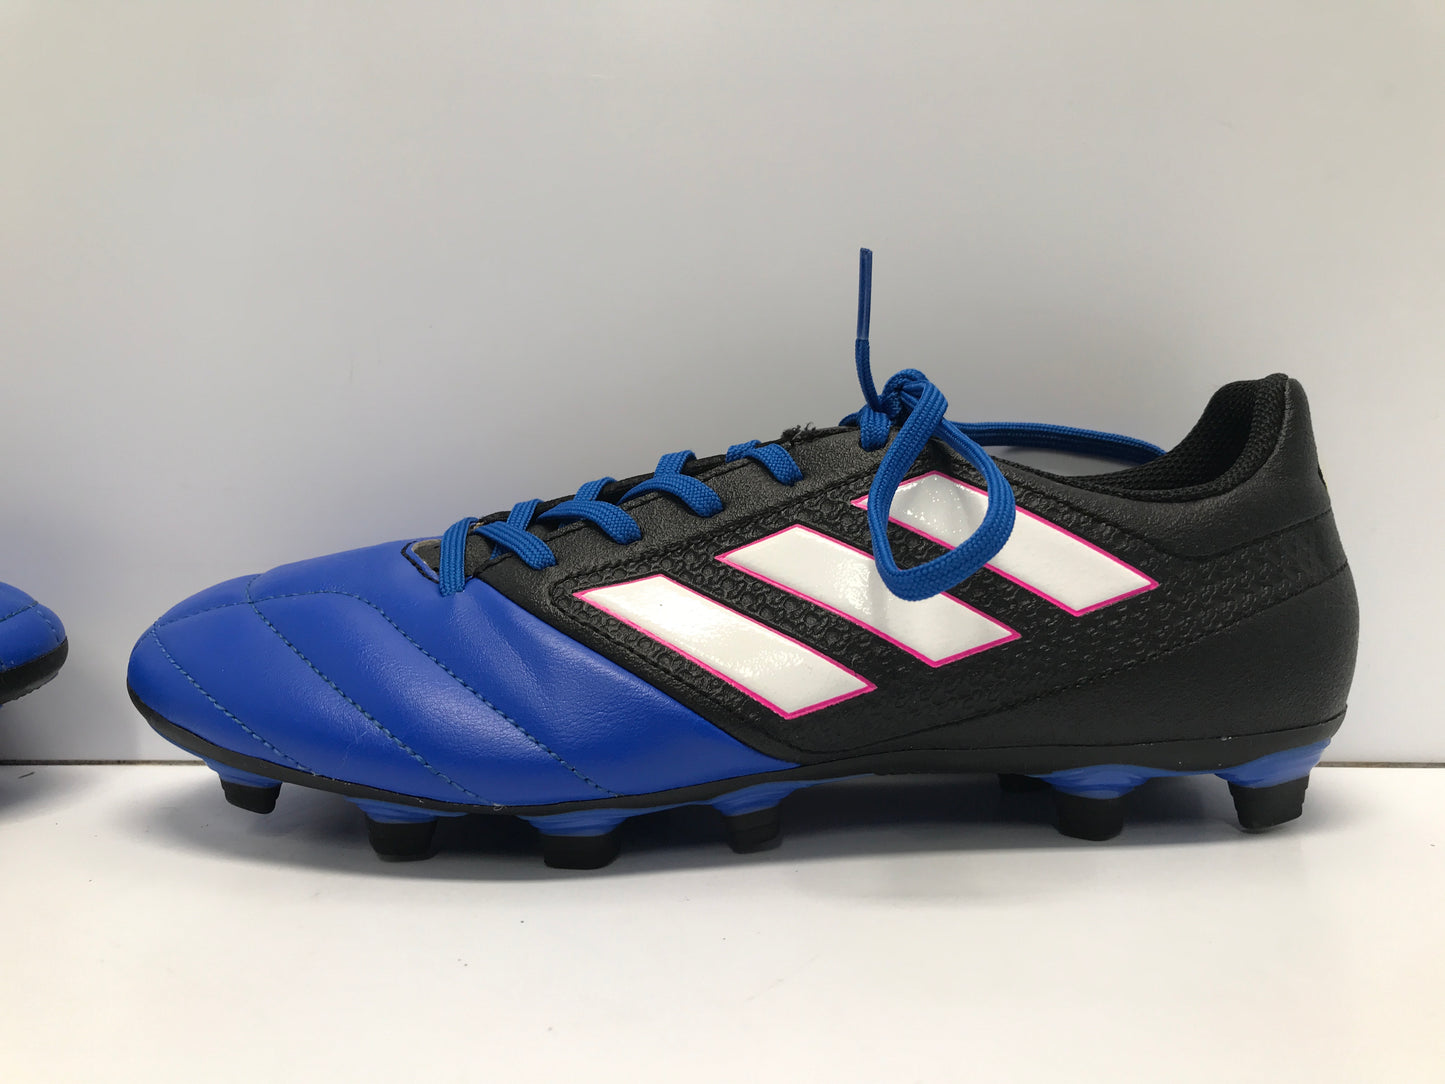 Soccer Shoes Cleats Men's Size 8 Adidas Blue Black Pink New